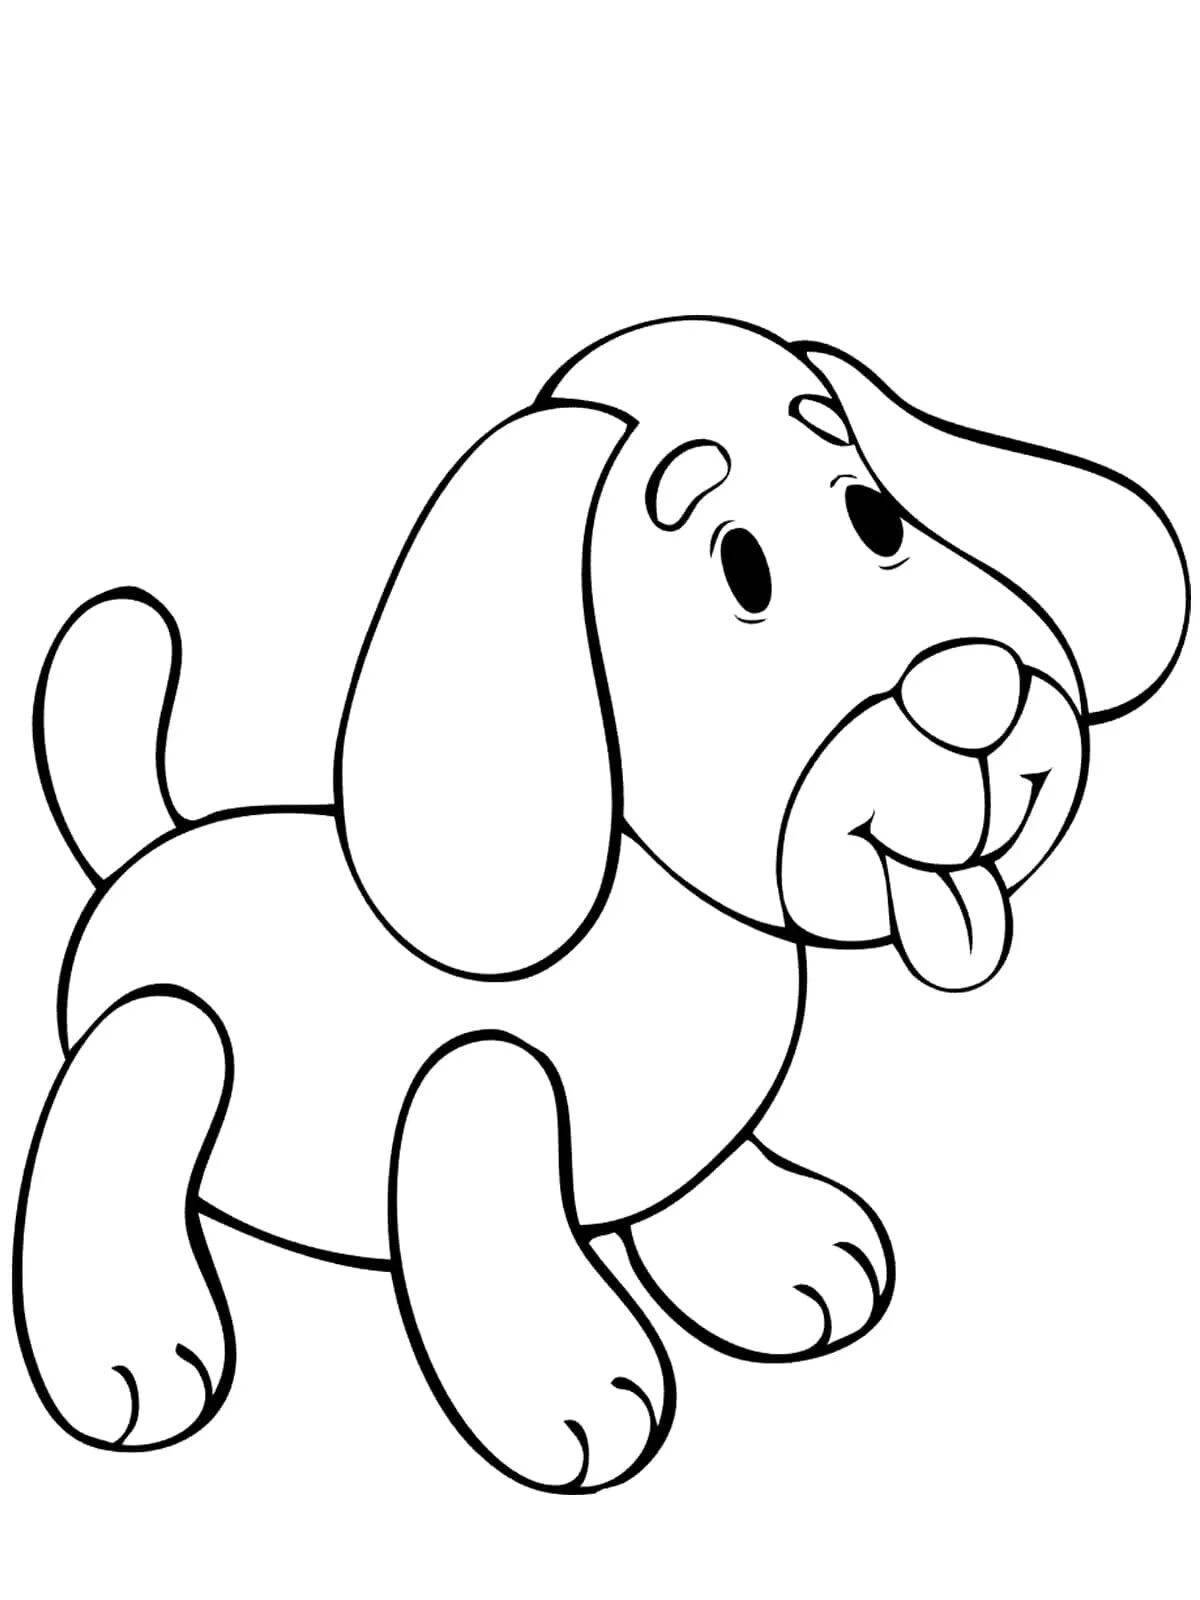 Coloring book luminescent light dog